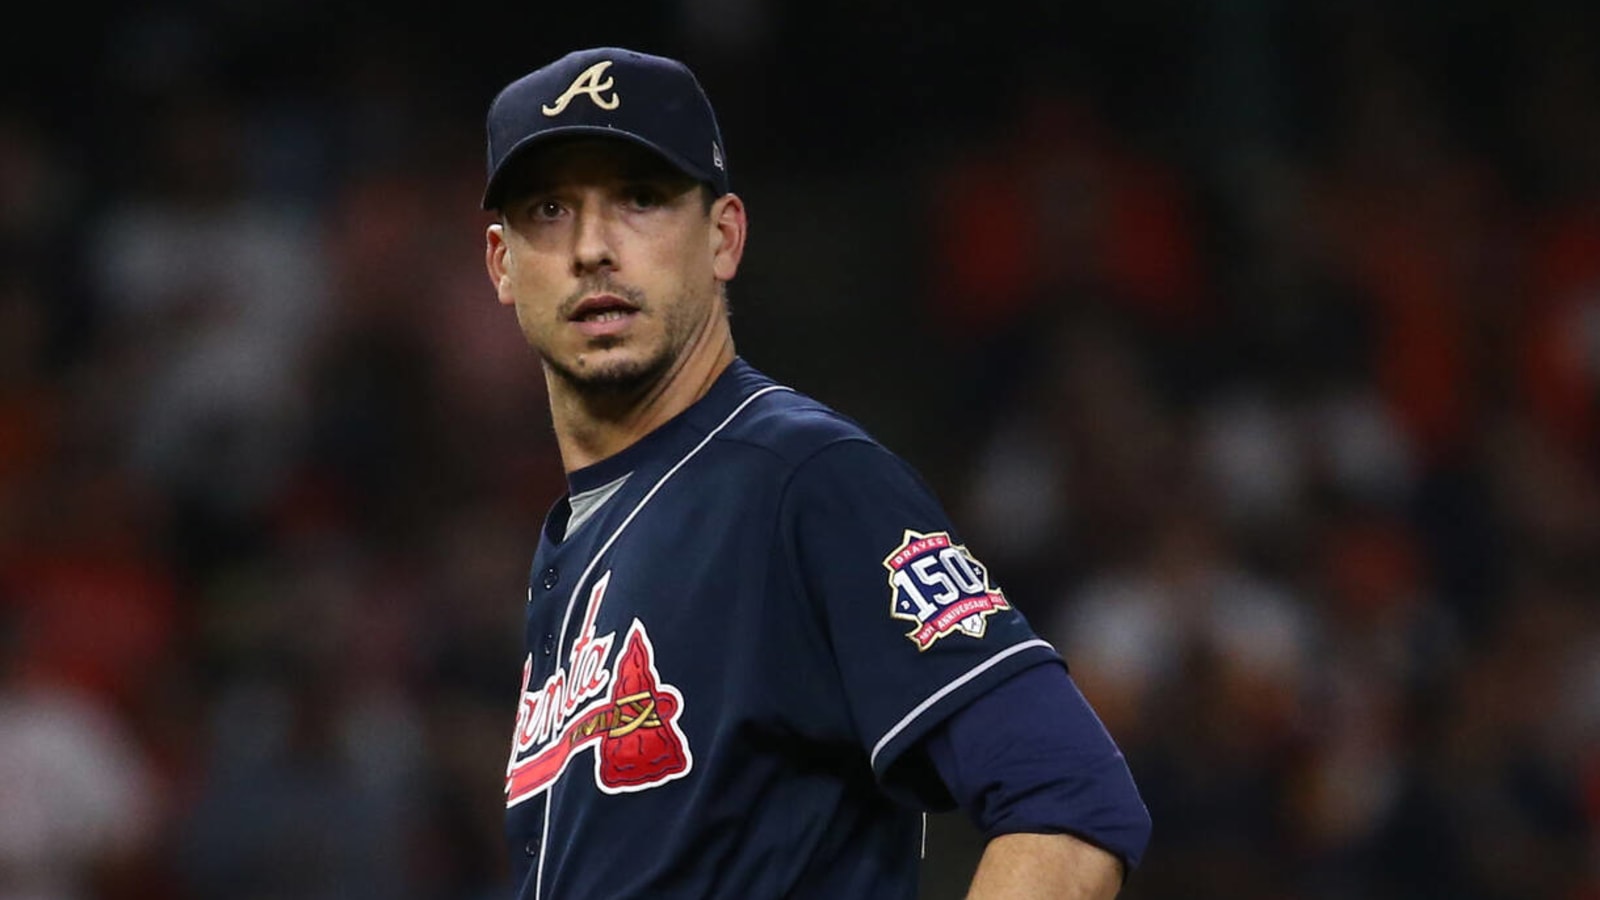 Charlie Morton: My recovery from fractured fibula going well